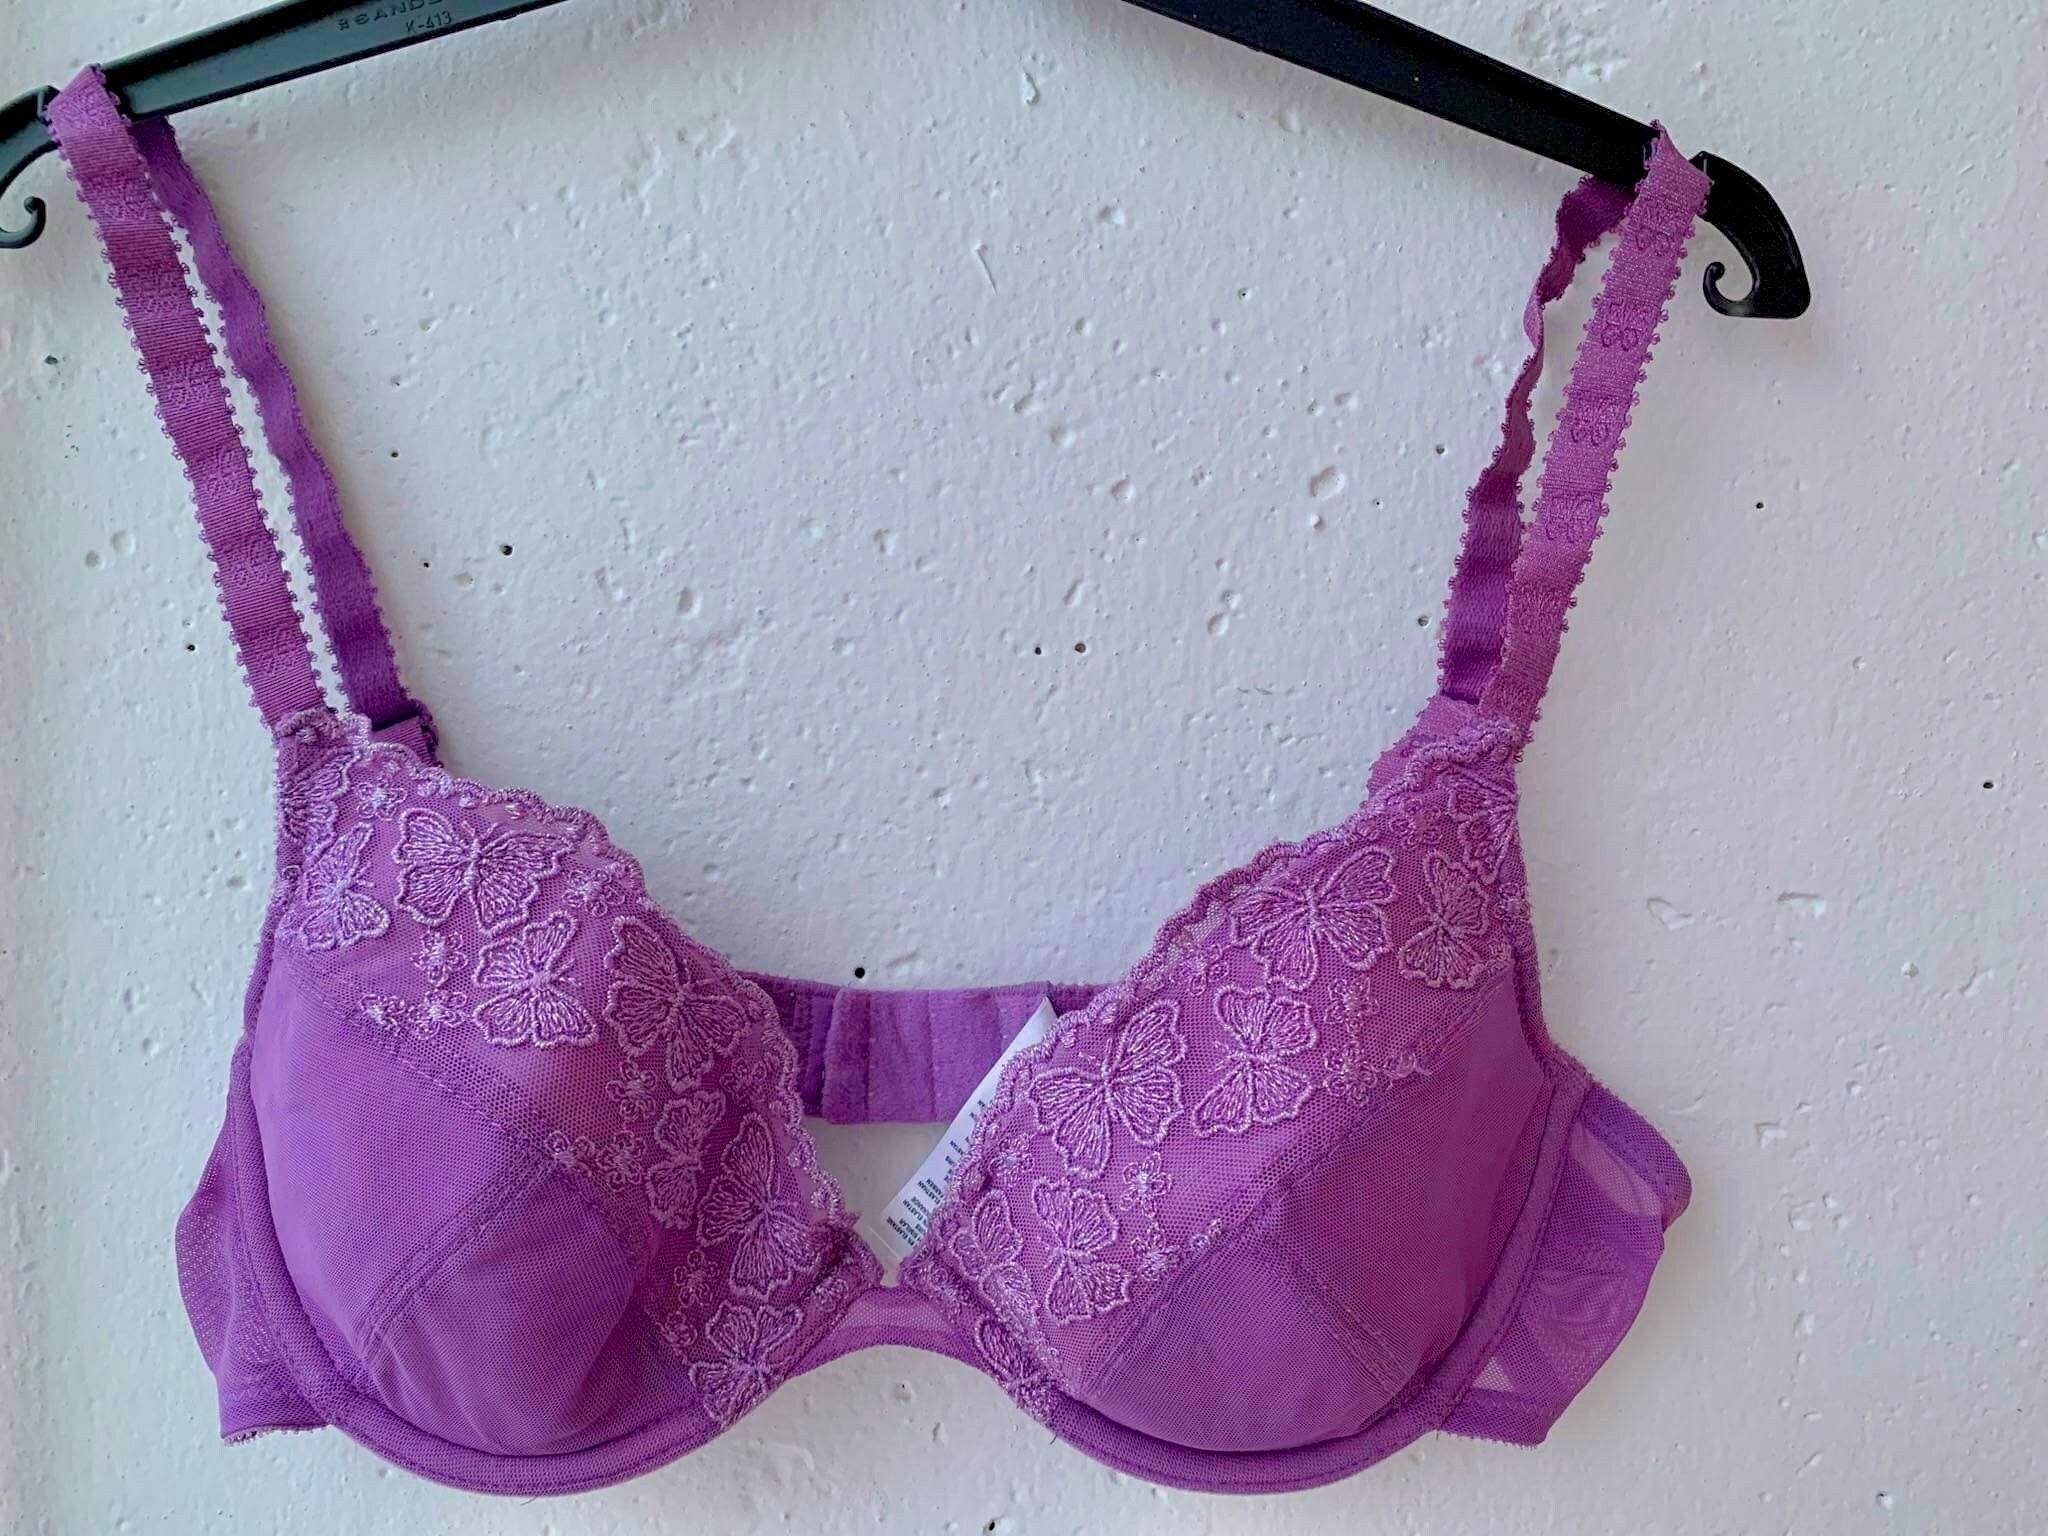 PINK - Victoria's Secret lace bra Size 34 C - $20 - From suzy